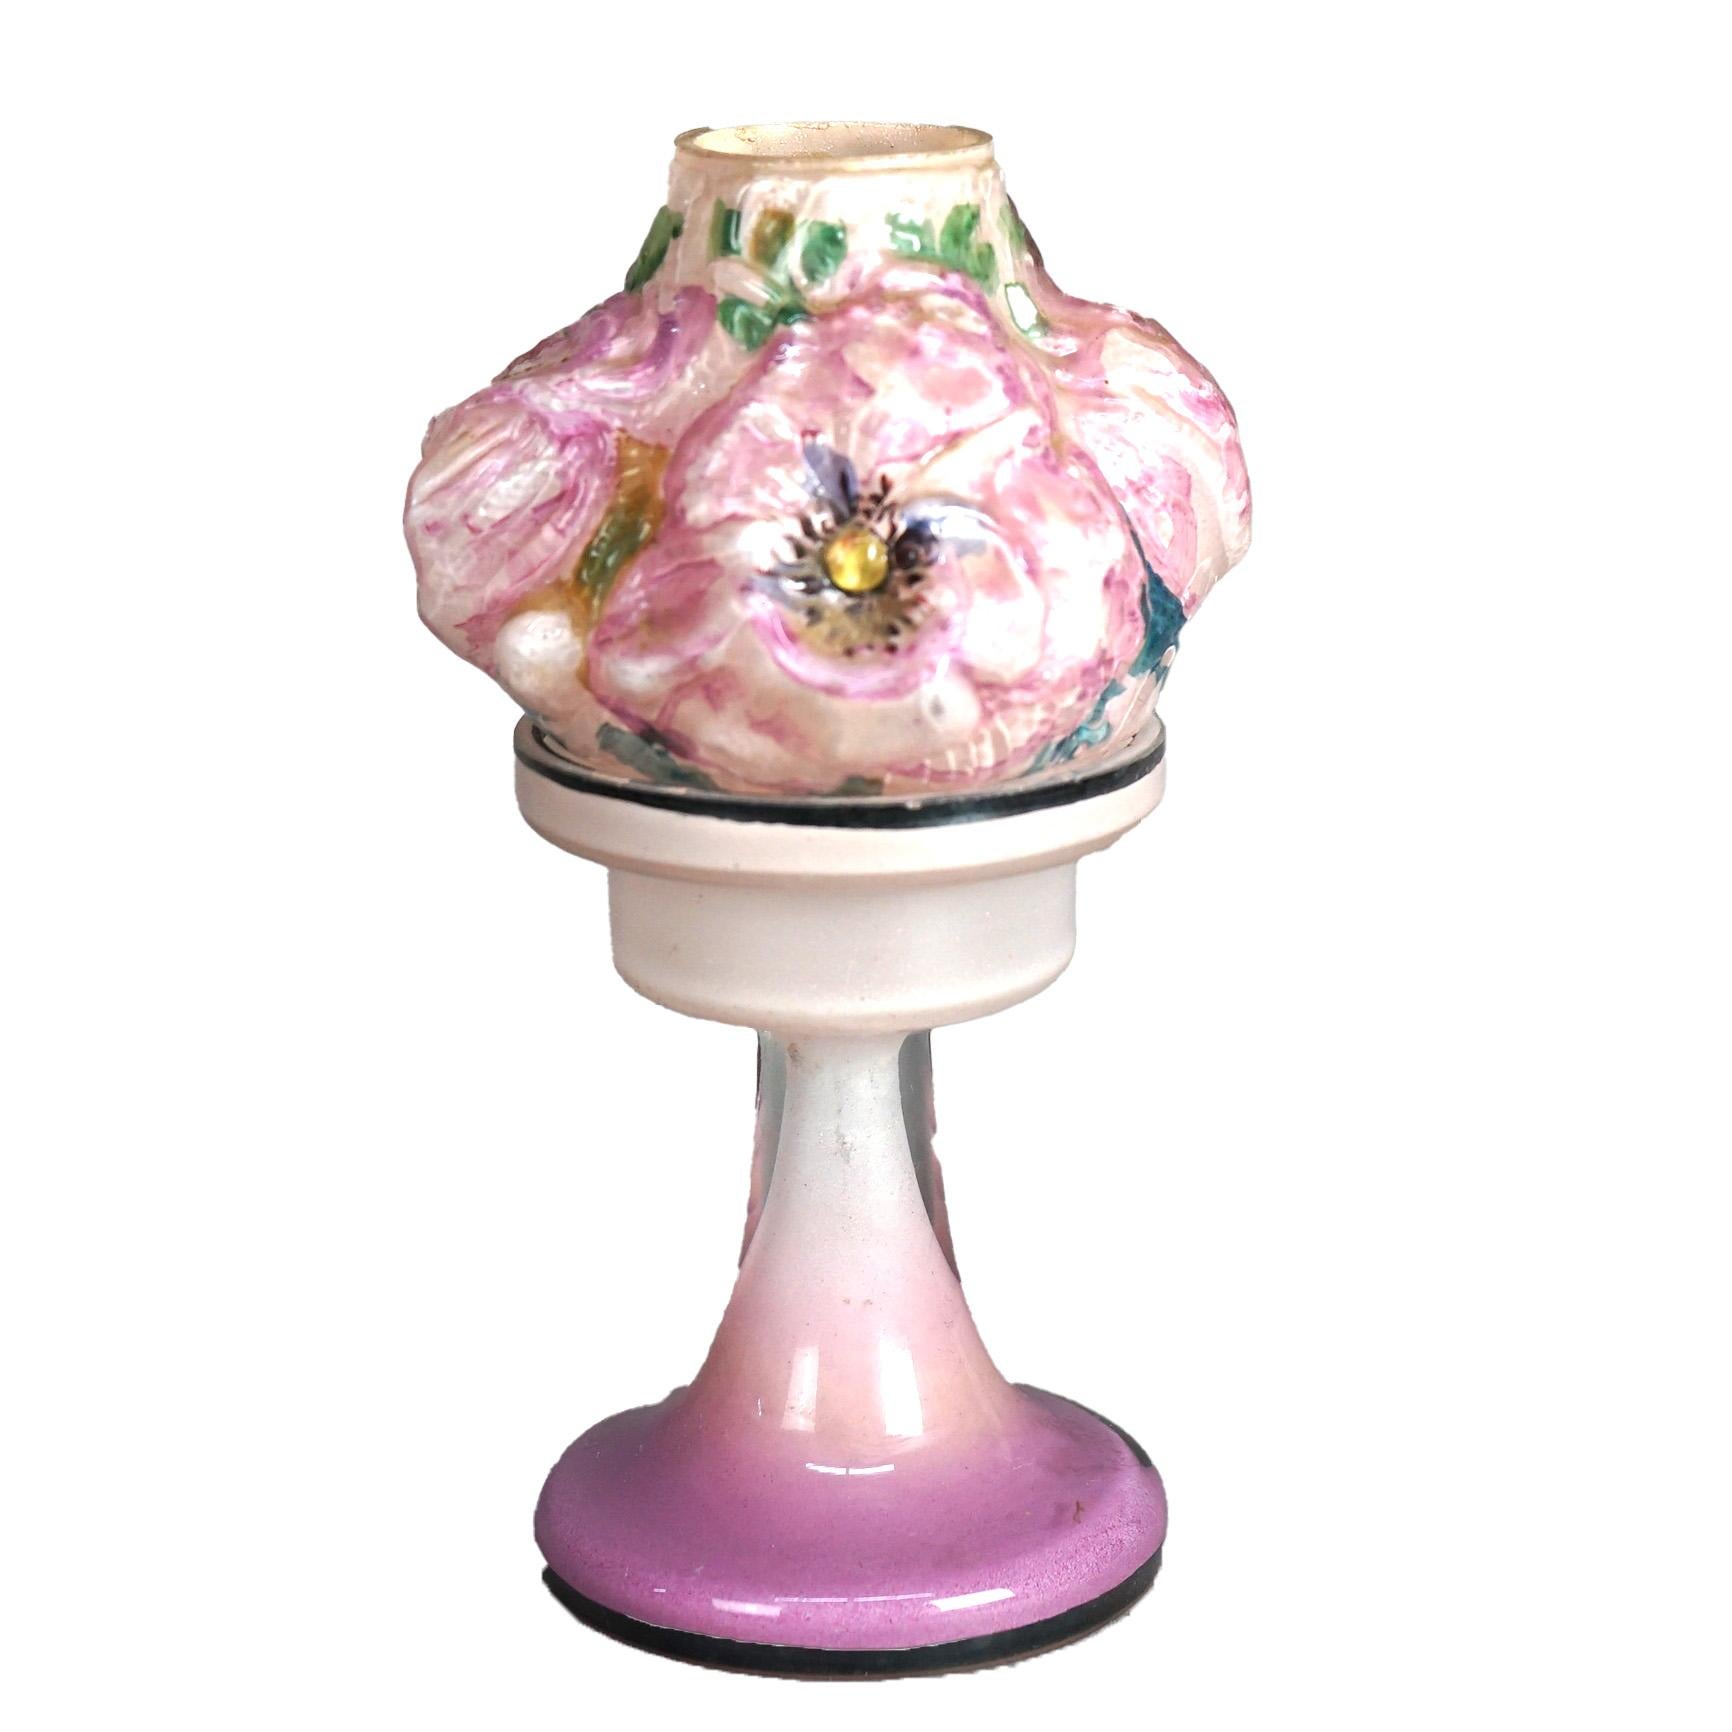 An antique candle lamp by Pairpoint offers art glass construction with blown shade having floral design with peonies, seated on pedestal base, c1910

Measures - 8